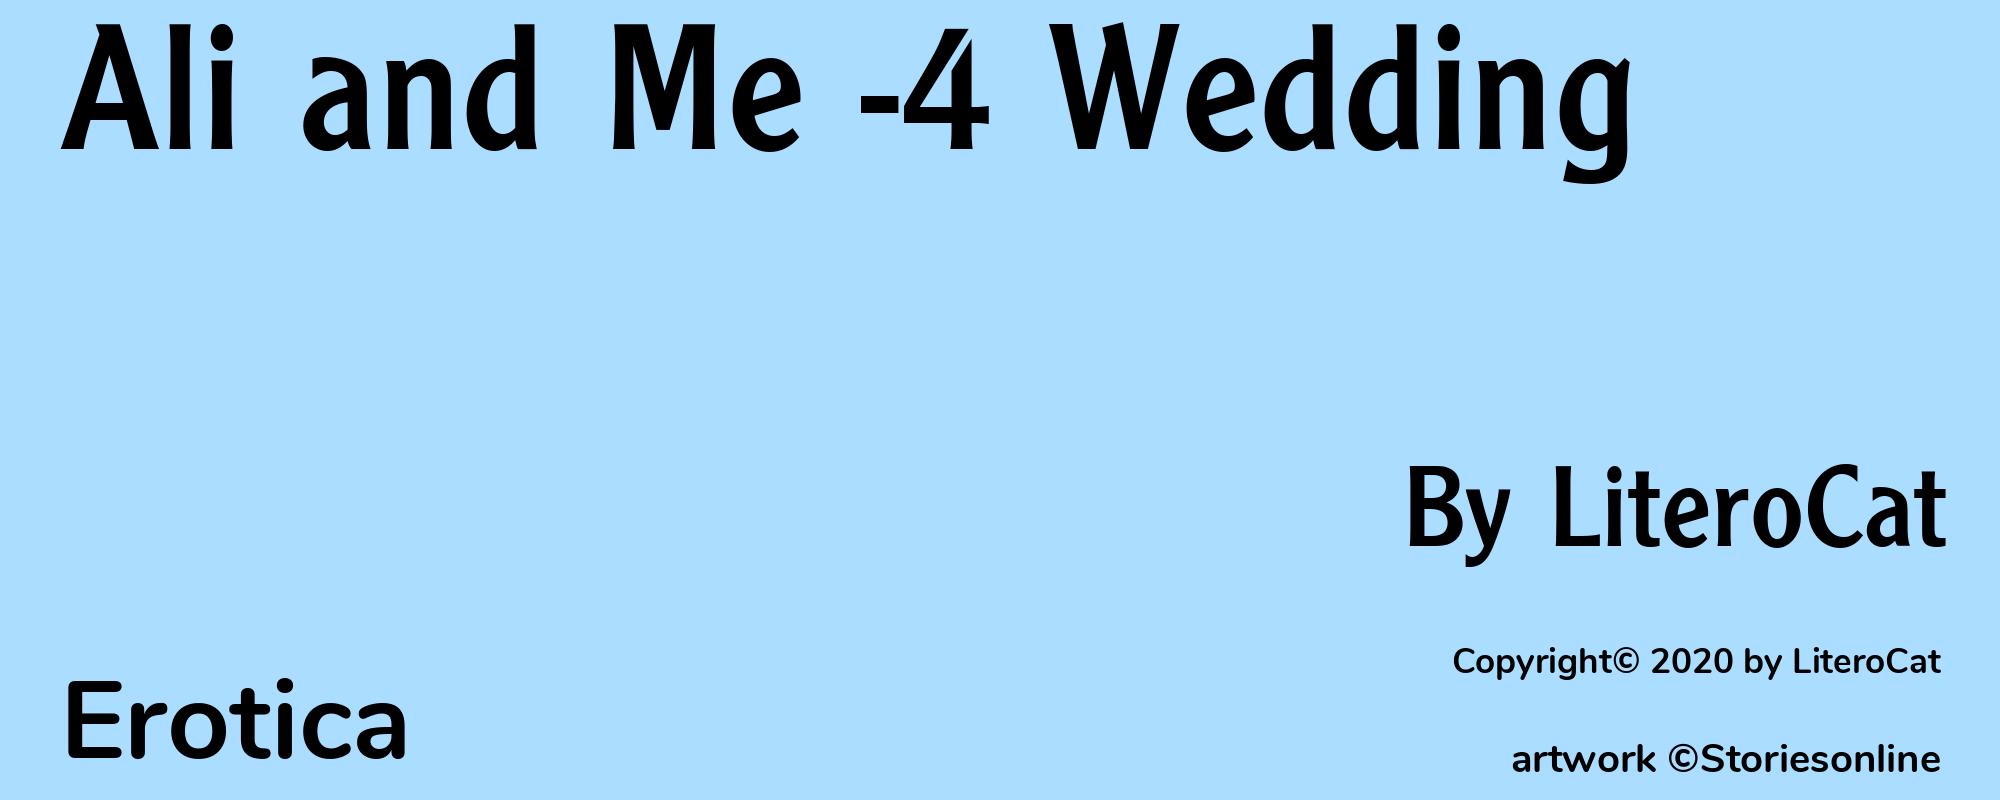 Ali and Me -4 Wedding - Cover